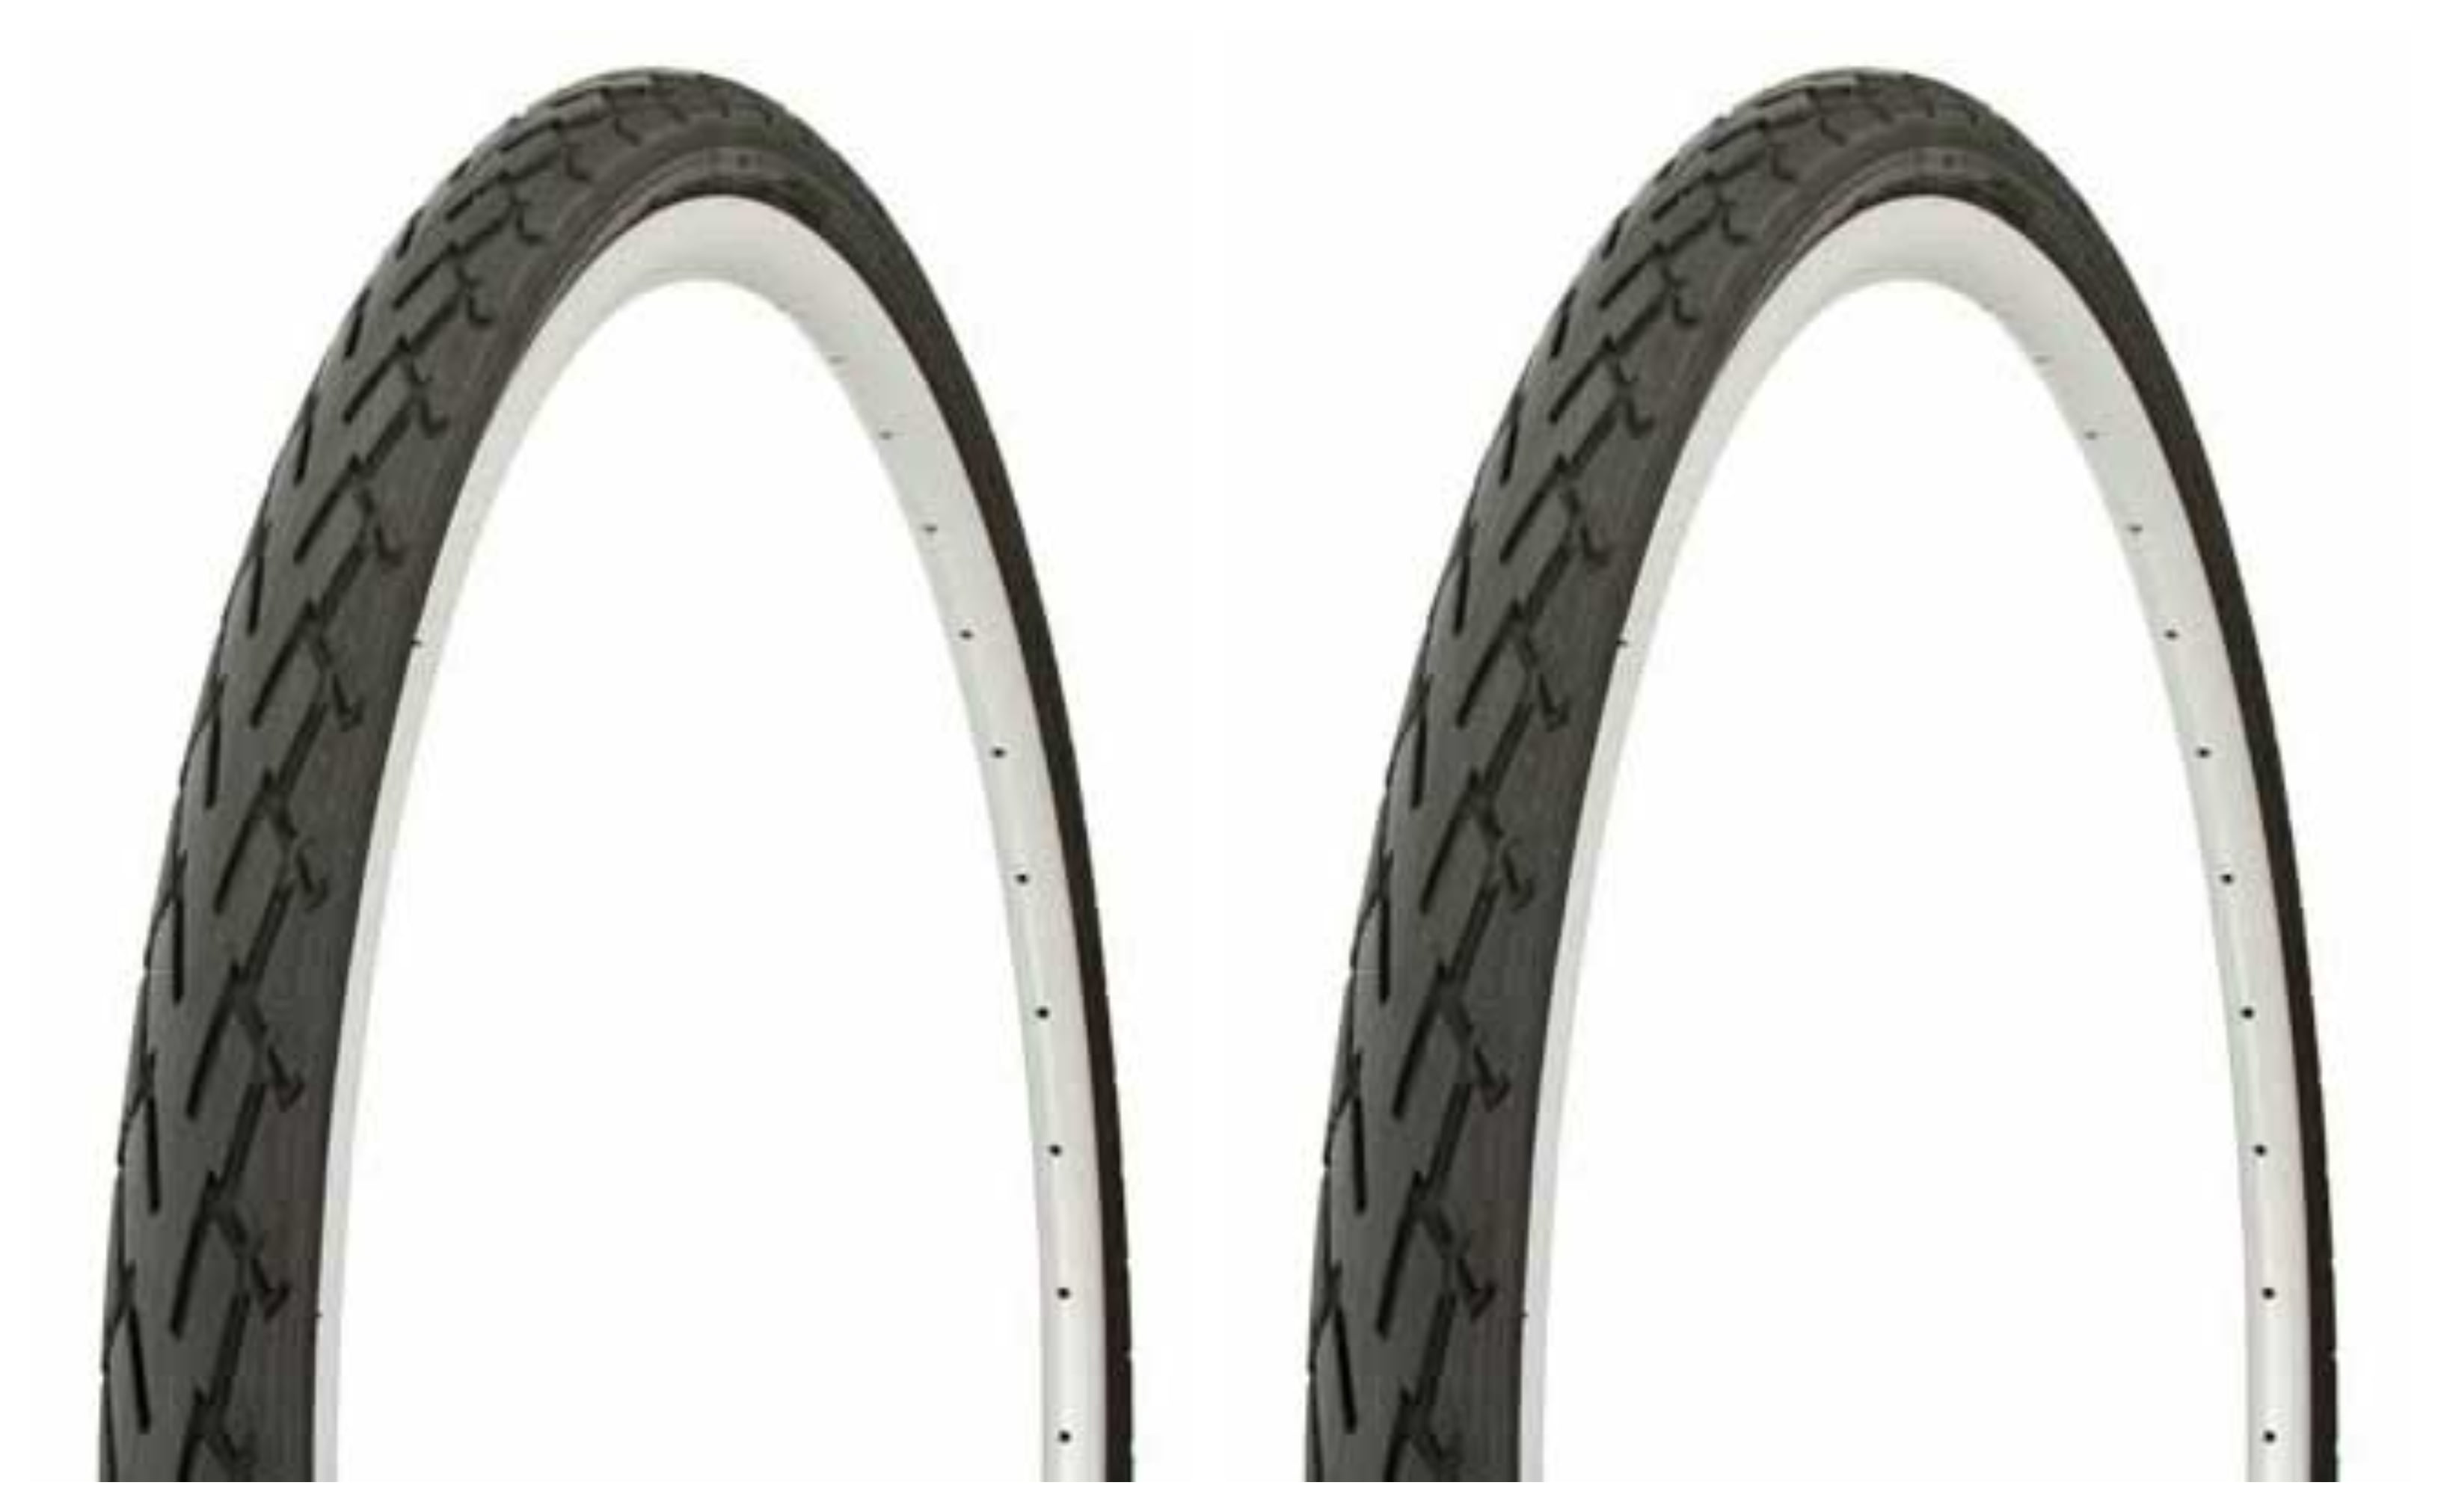 Pair of two Road Bike Tire 26 x 1.25 DURO Pick up Colors 